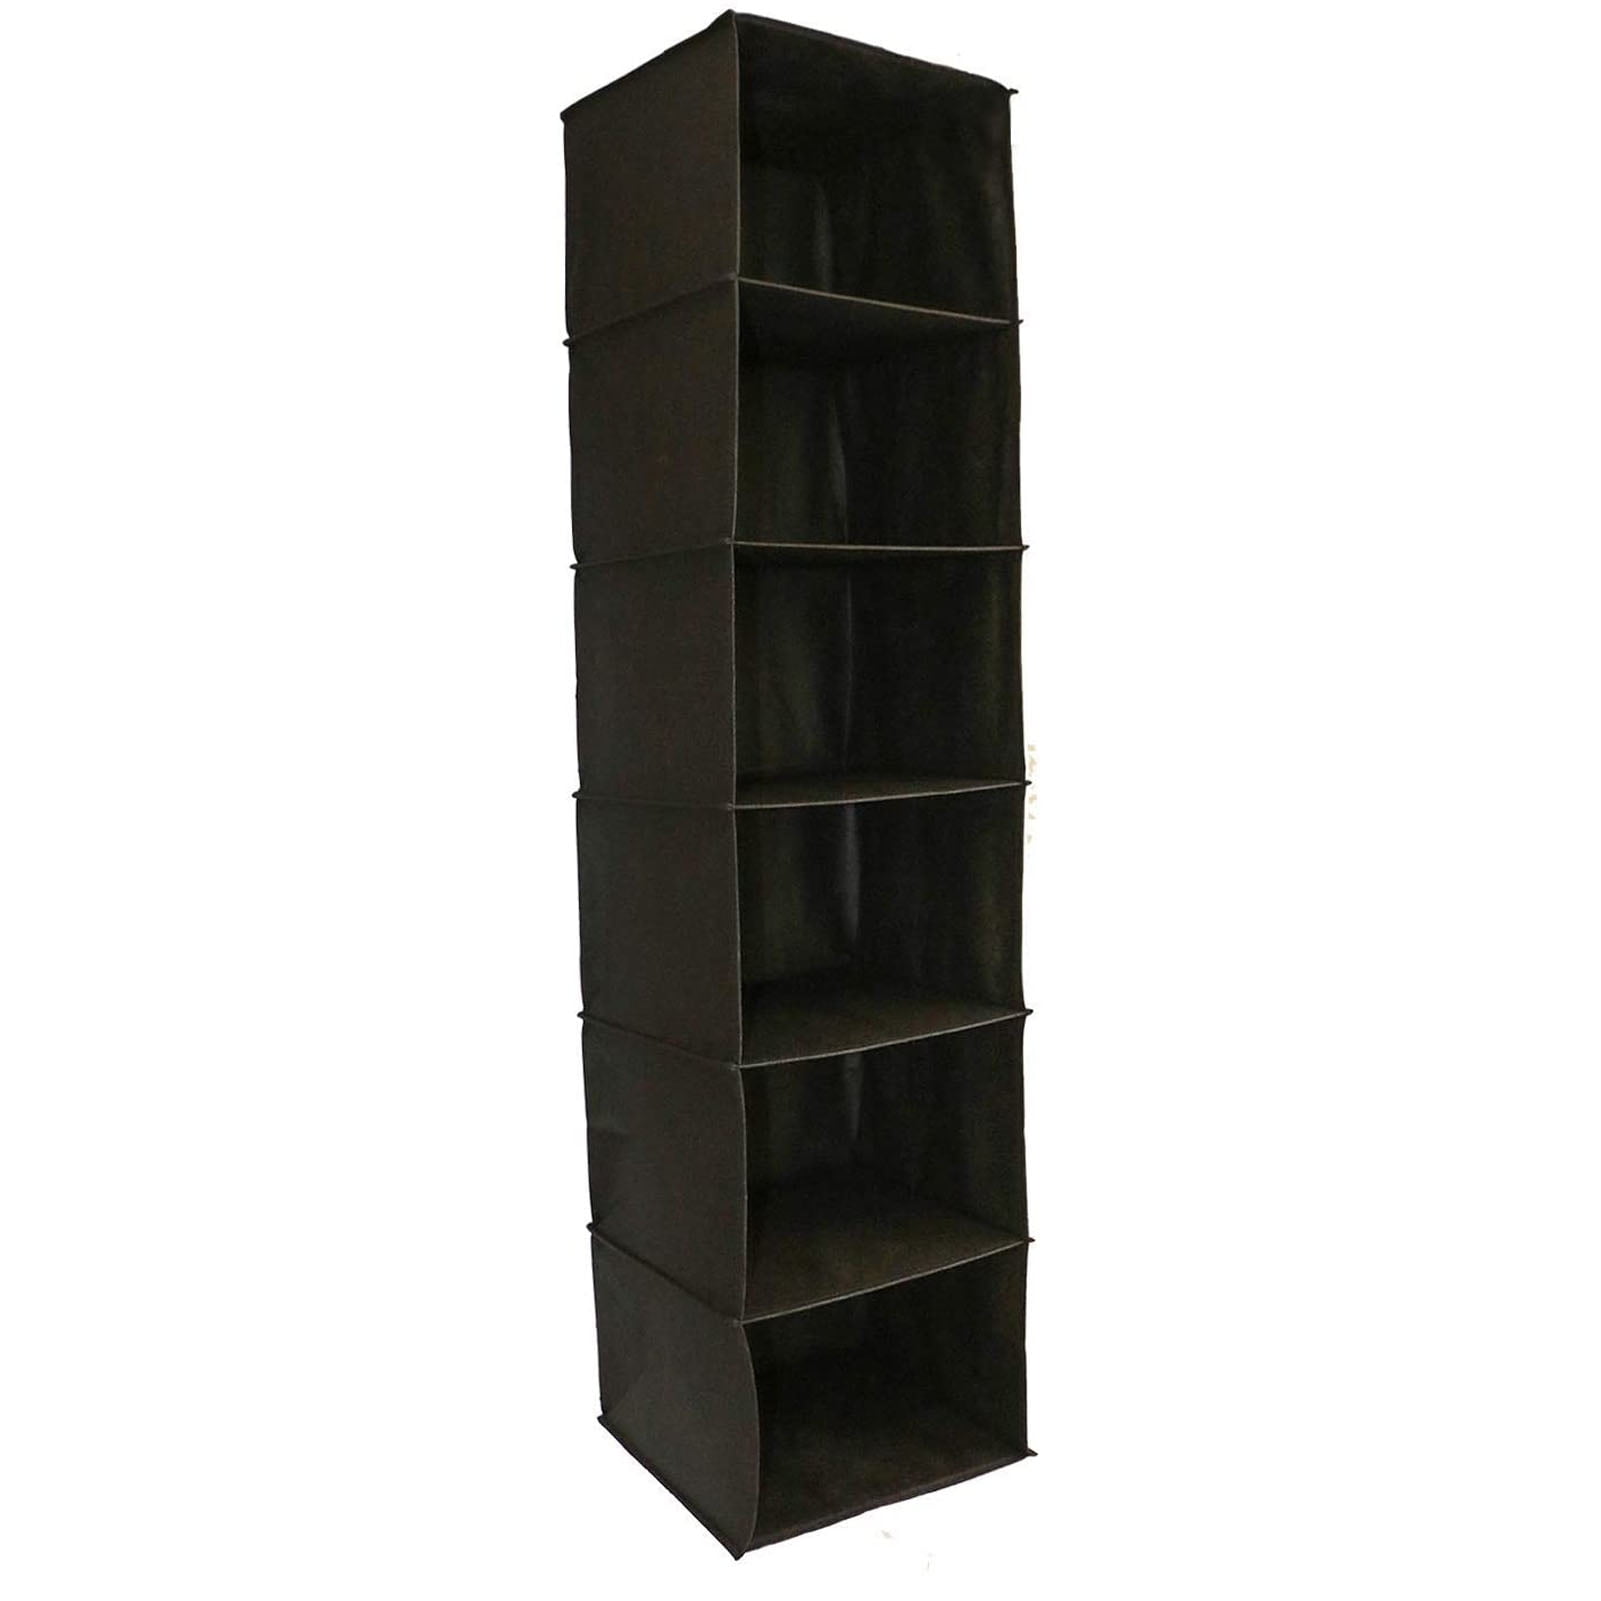 Long Soft Fabric Over Closet Rod Hanging Storage Organizer with 6 Shelves (Black) $5.80  + Free S&H w/ Walmart+ or $35+